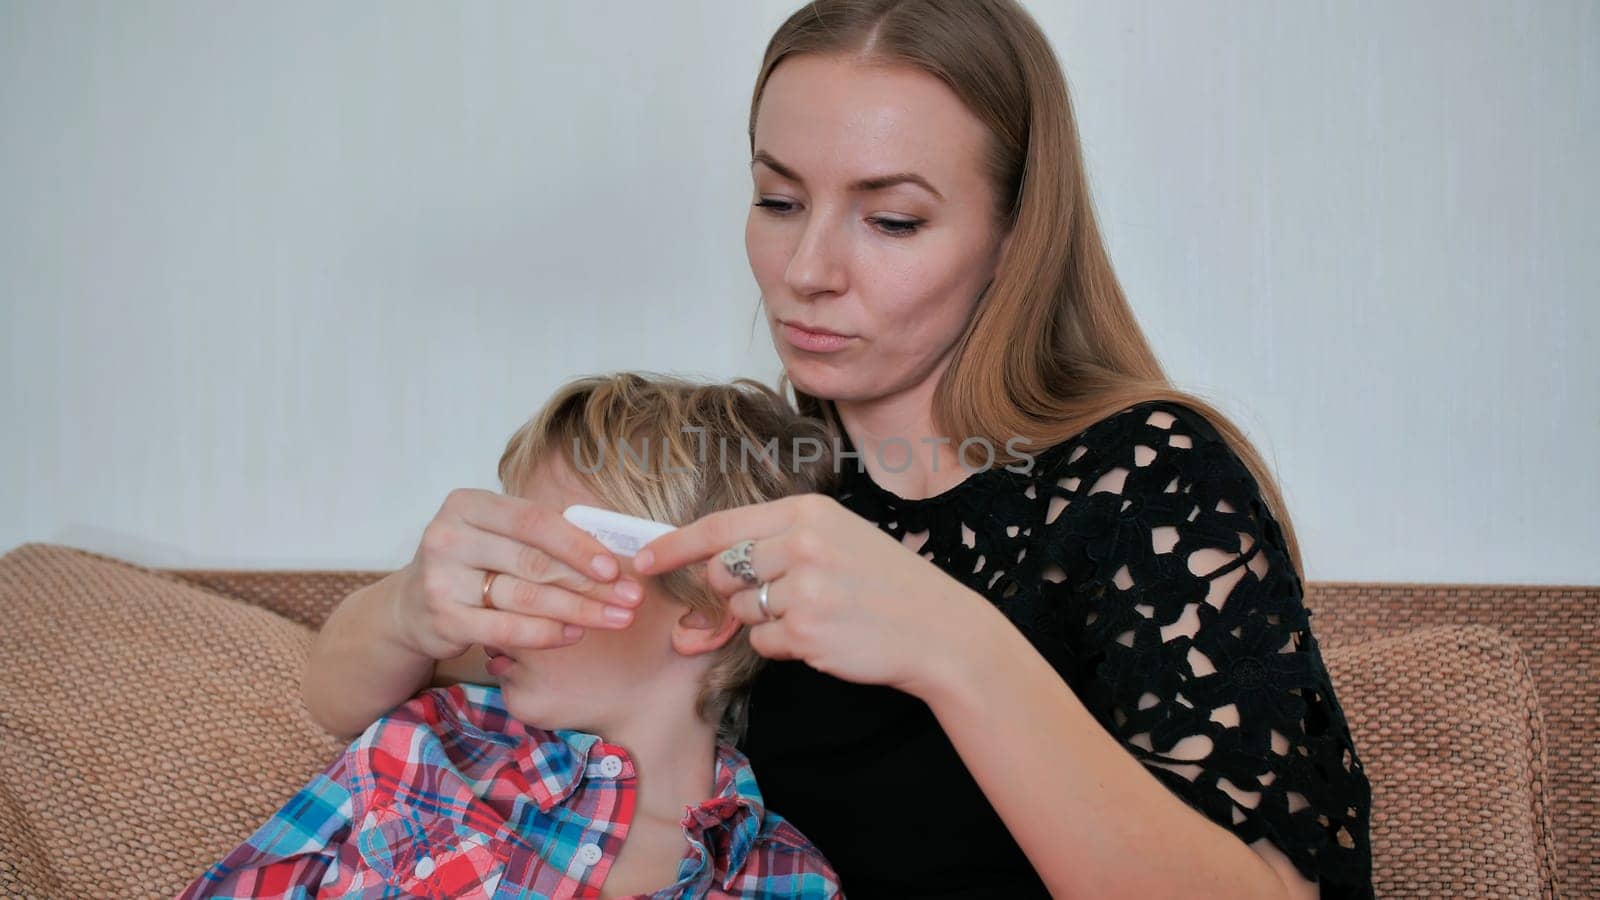 A caring mother measures the temperature of her son with a thermometer. by DovidPro